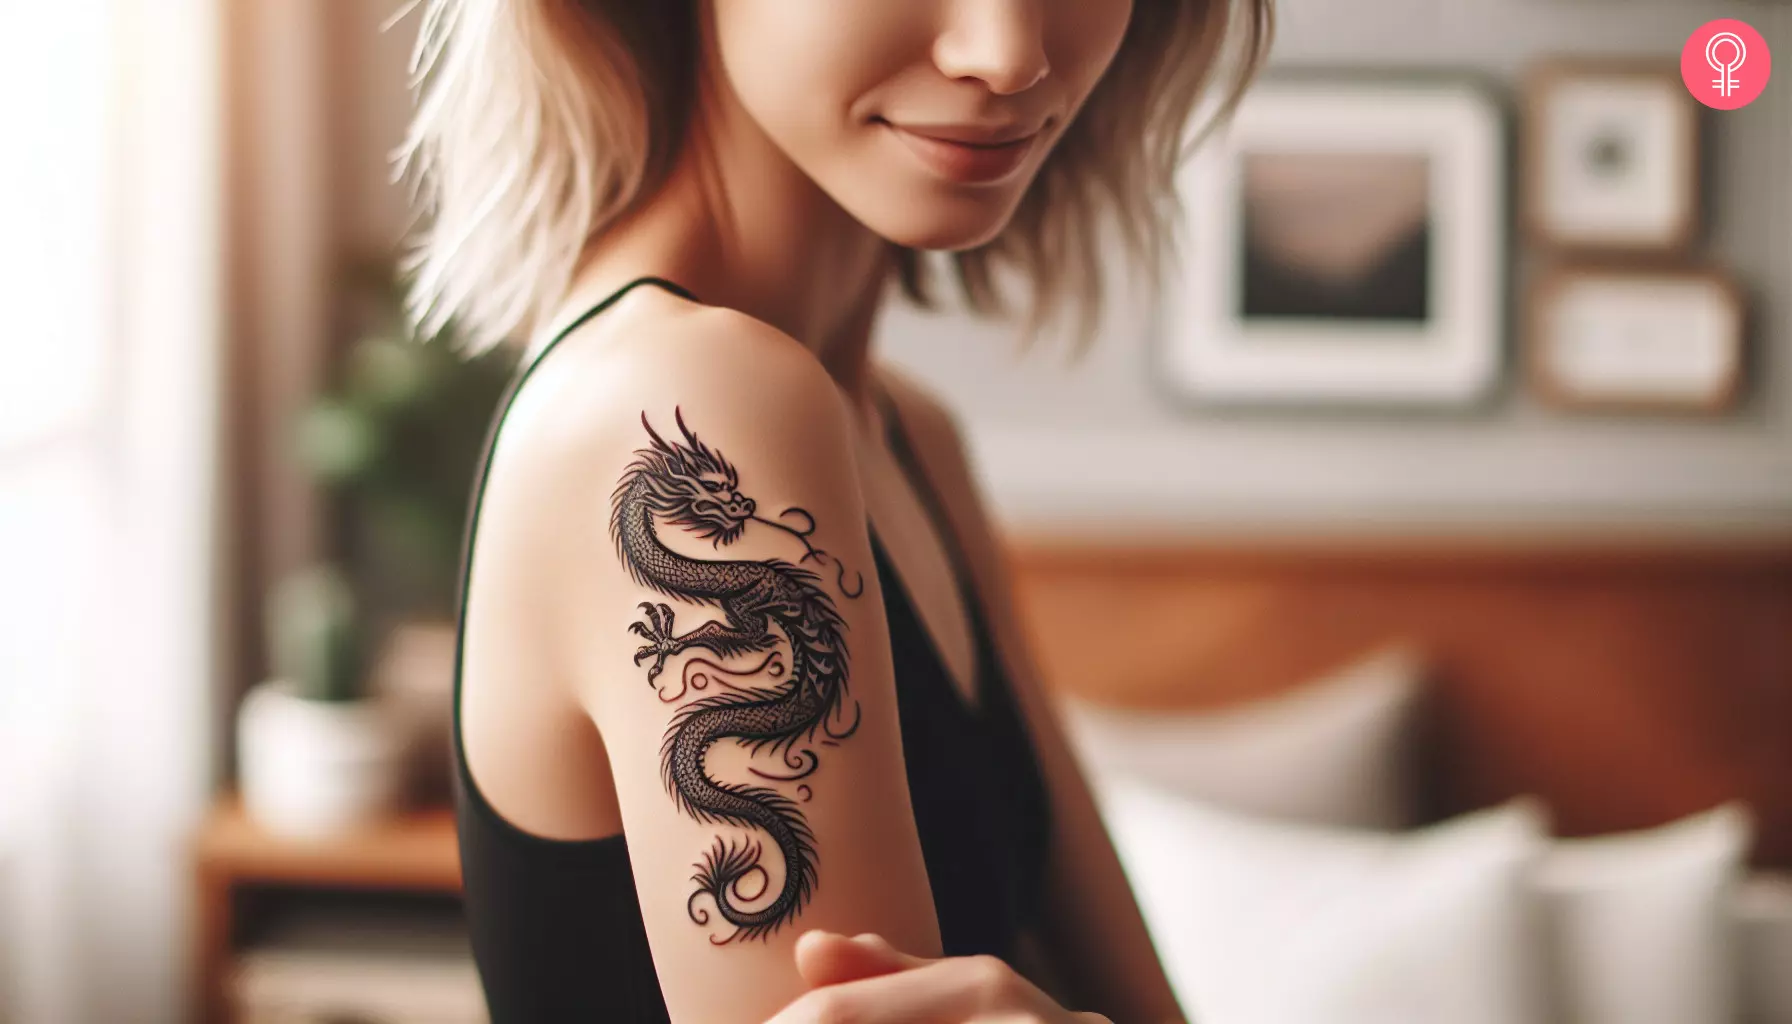 An Asian-style dragon tattoo on the upper arm